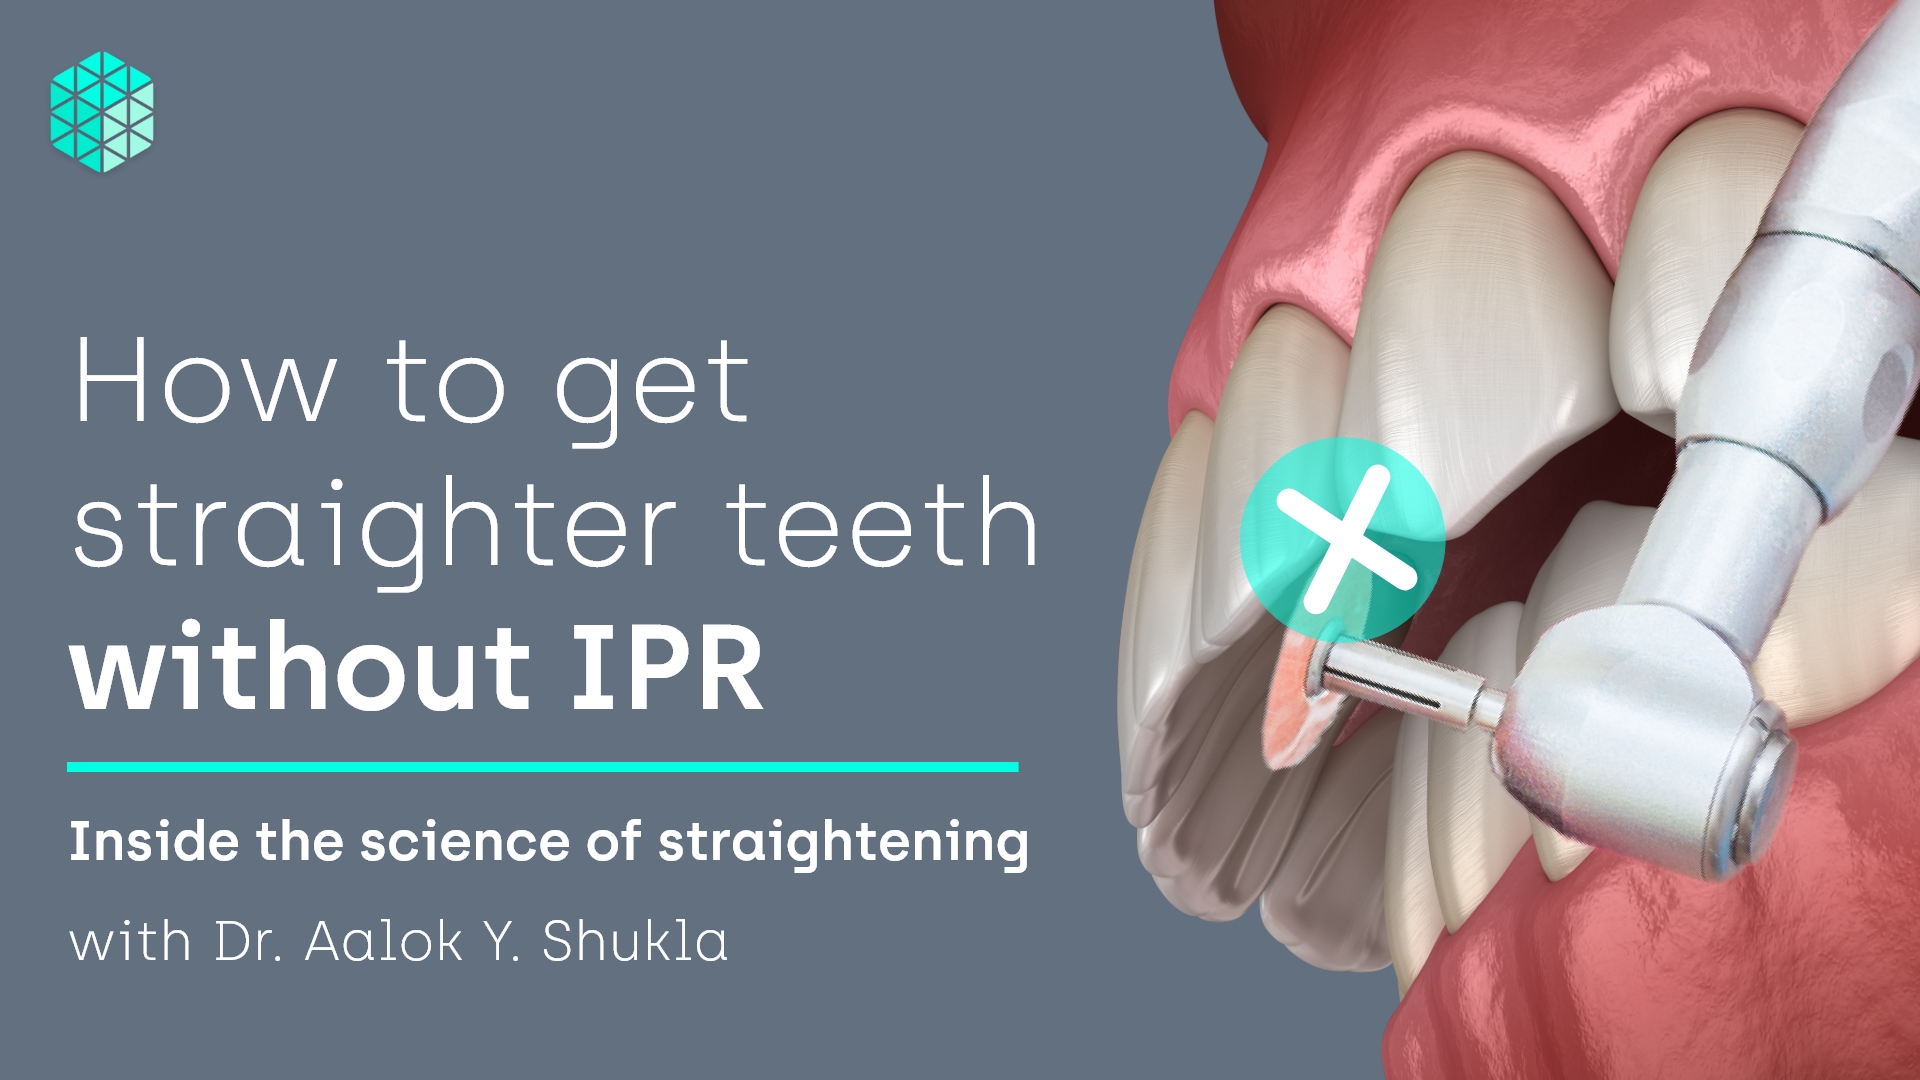 How to get straighter teeth without IPR